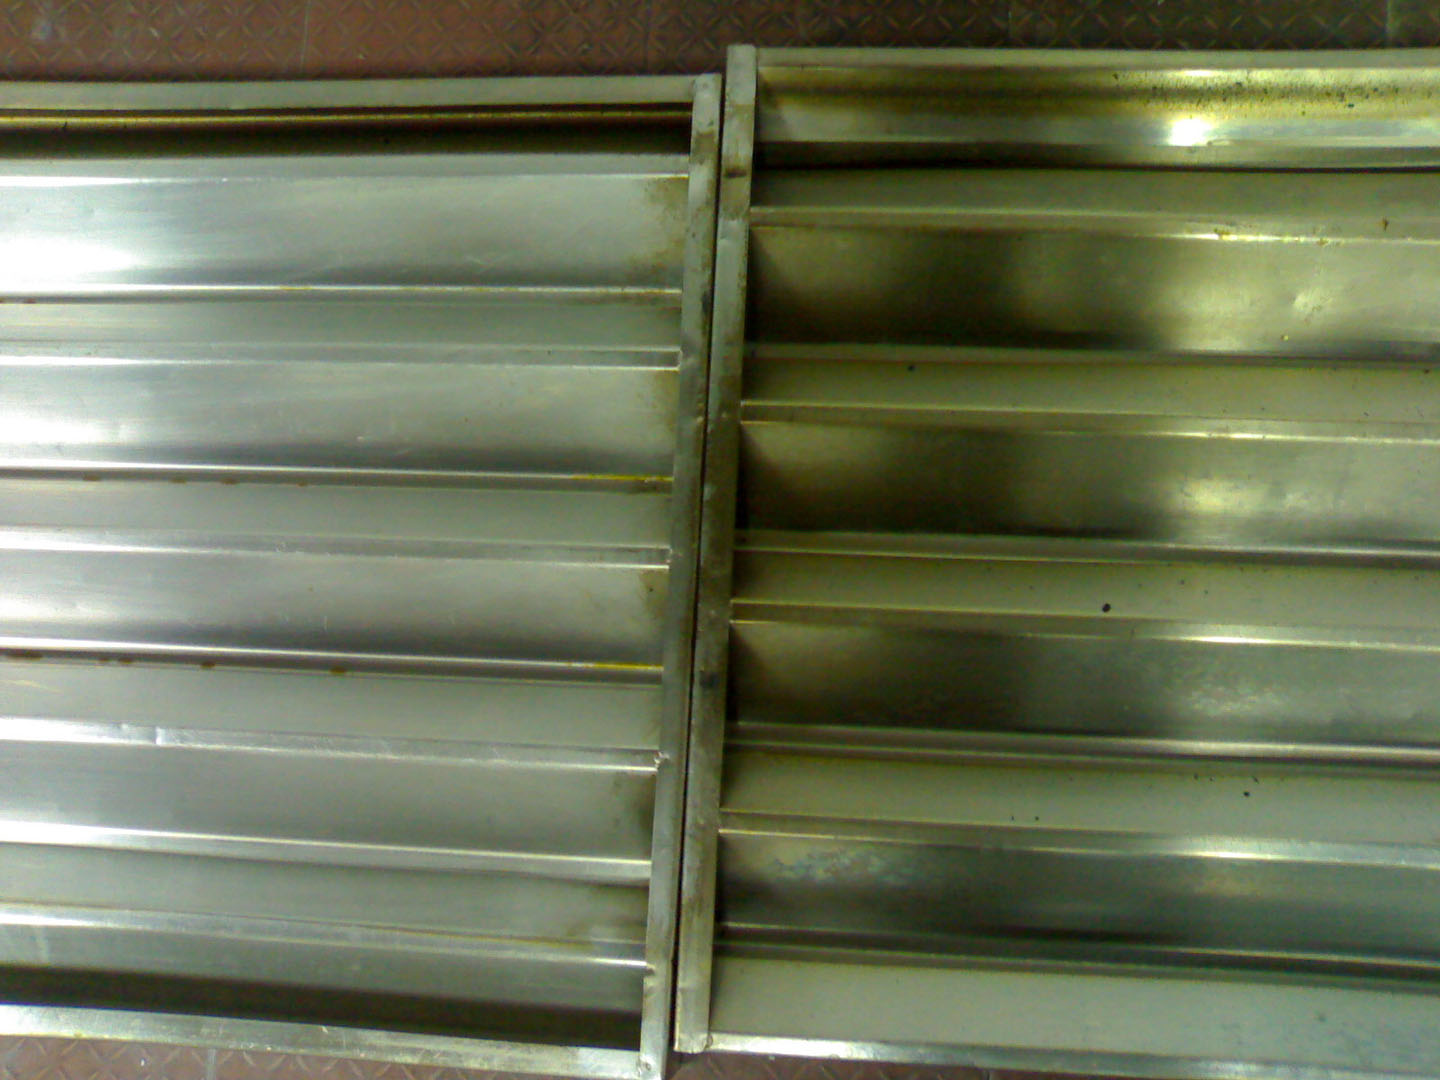 Two metal vents